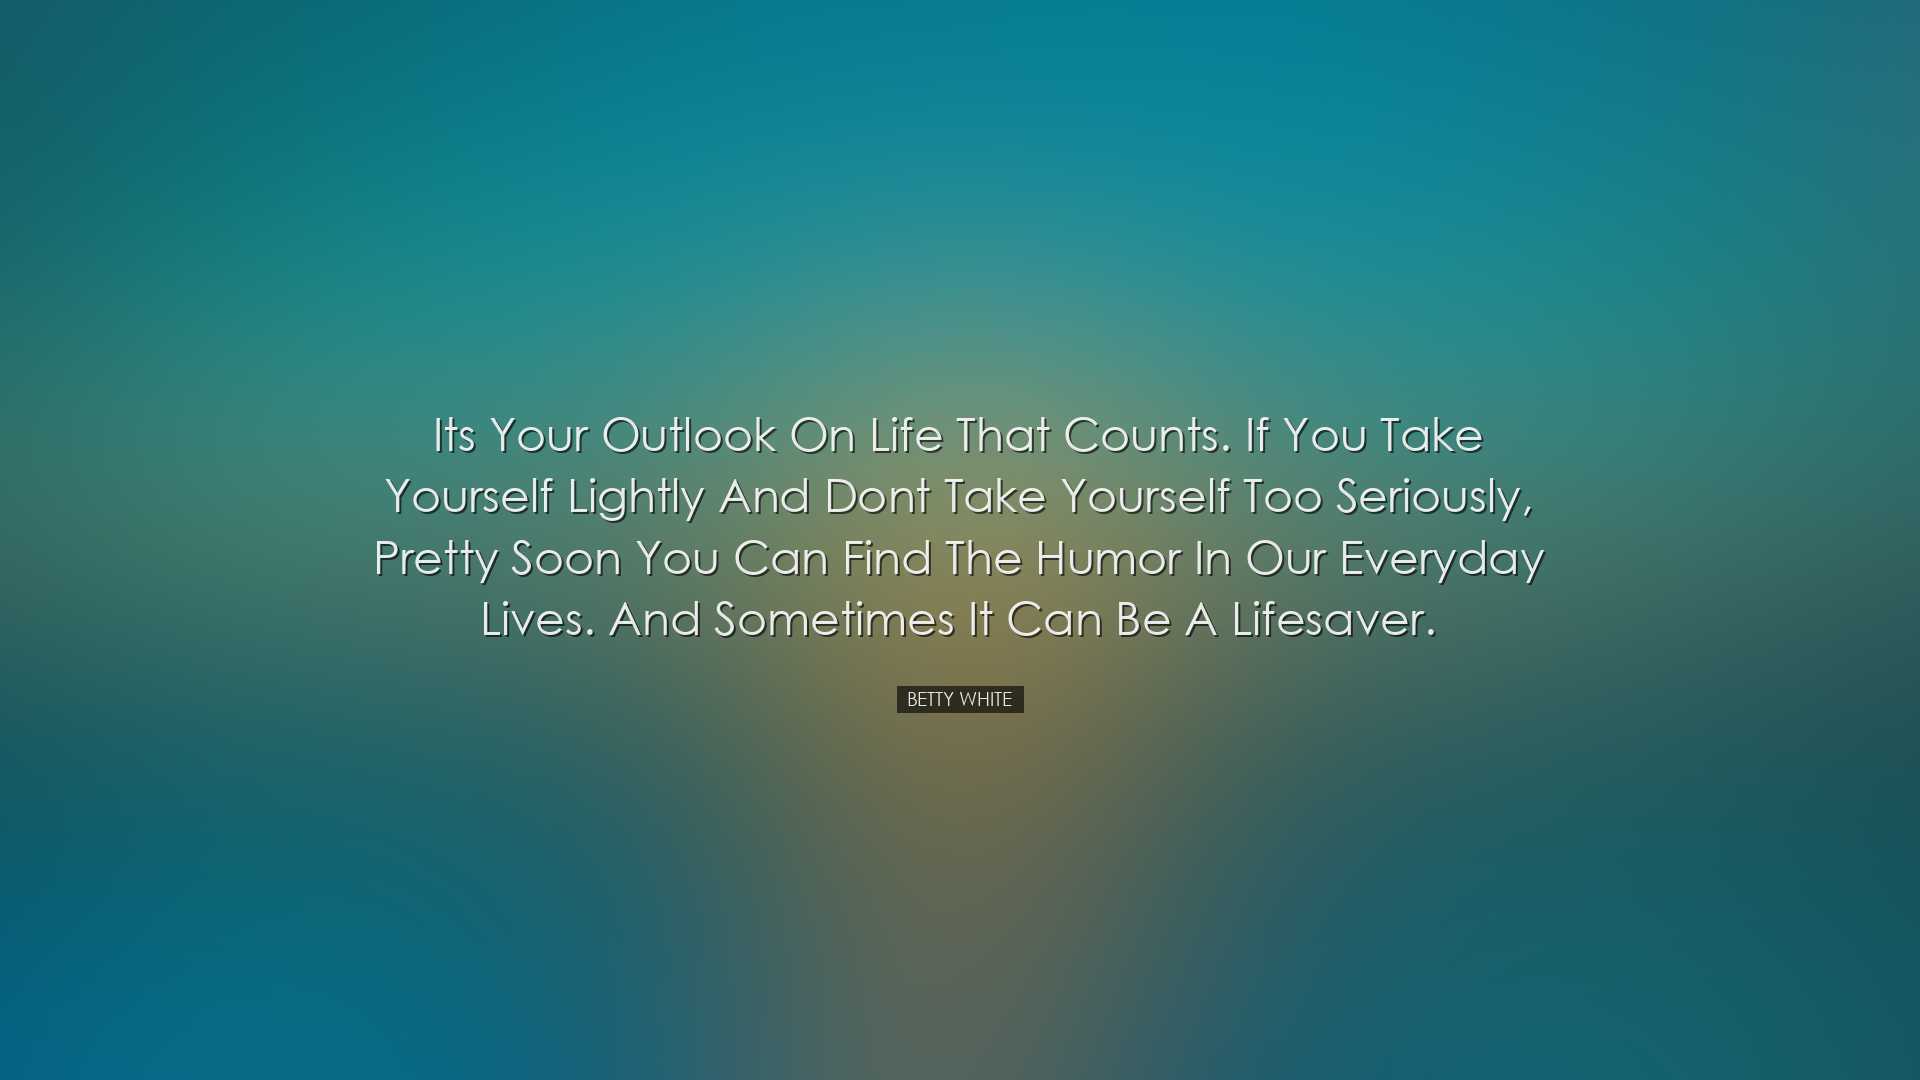 Its your outlook on life that counts. If you take yourself lightly